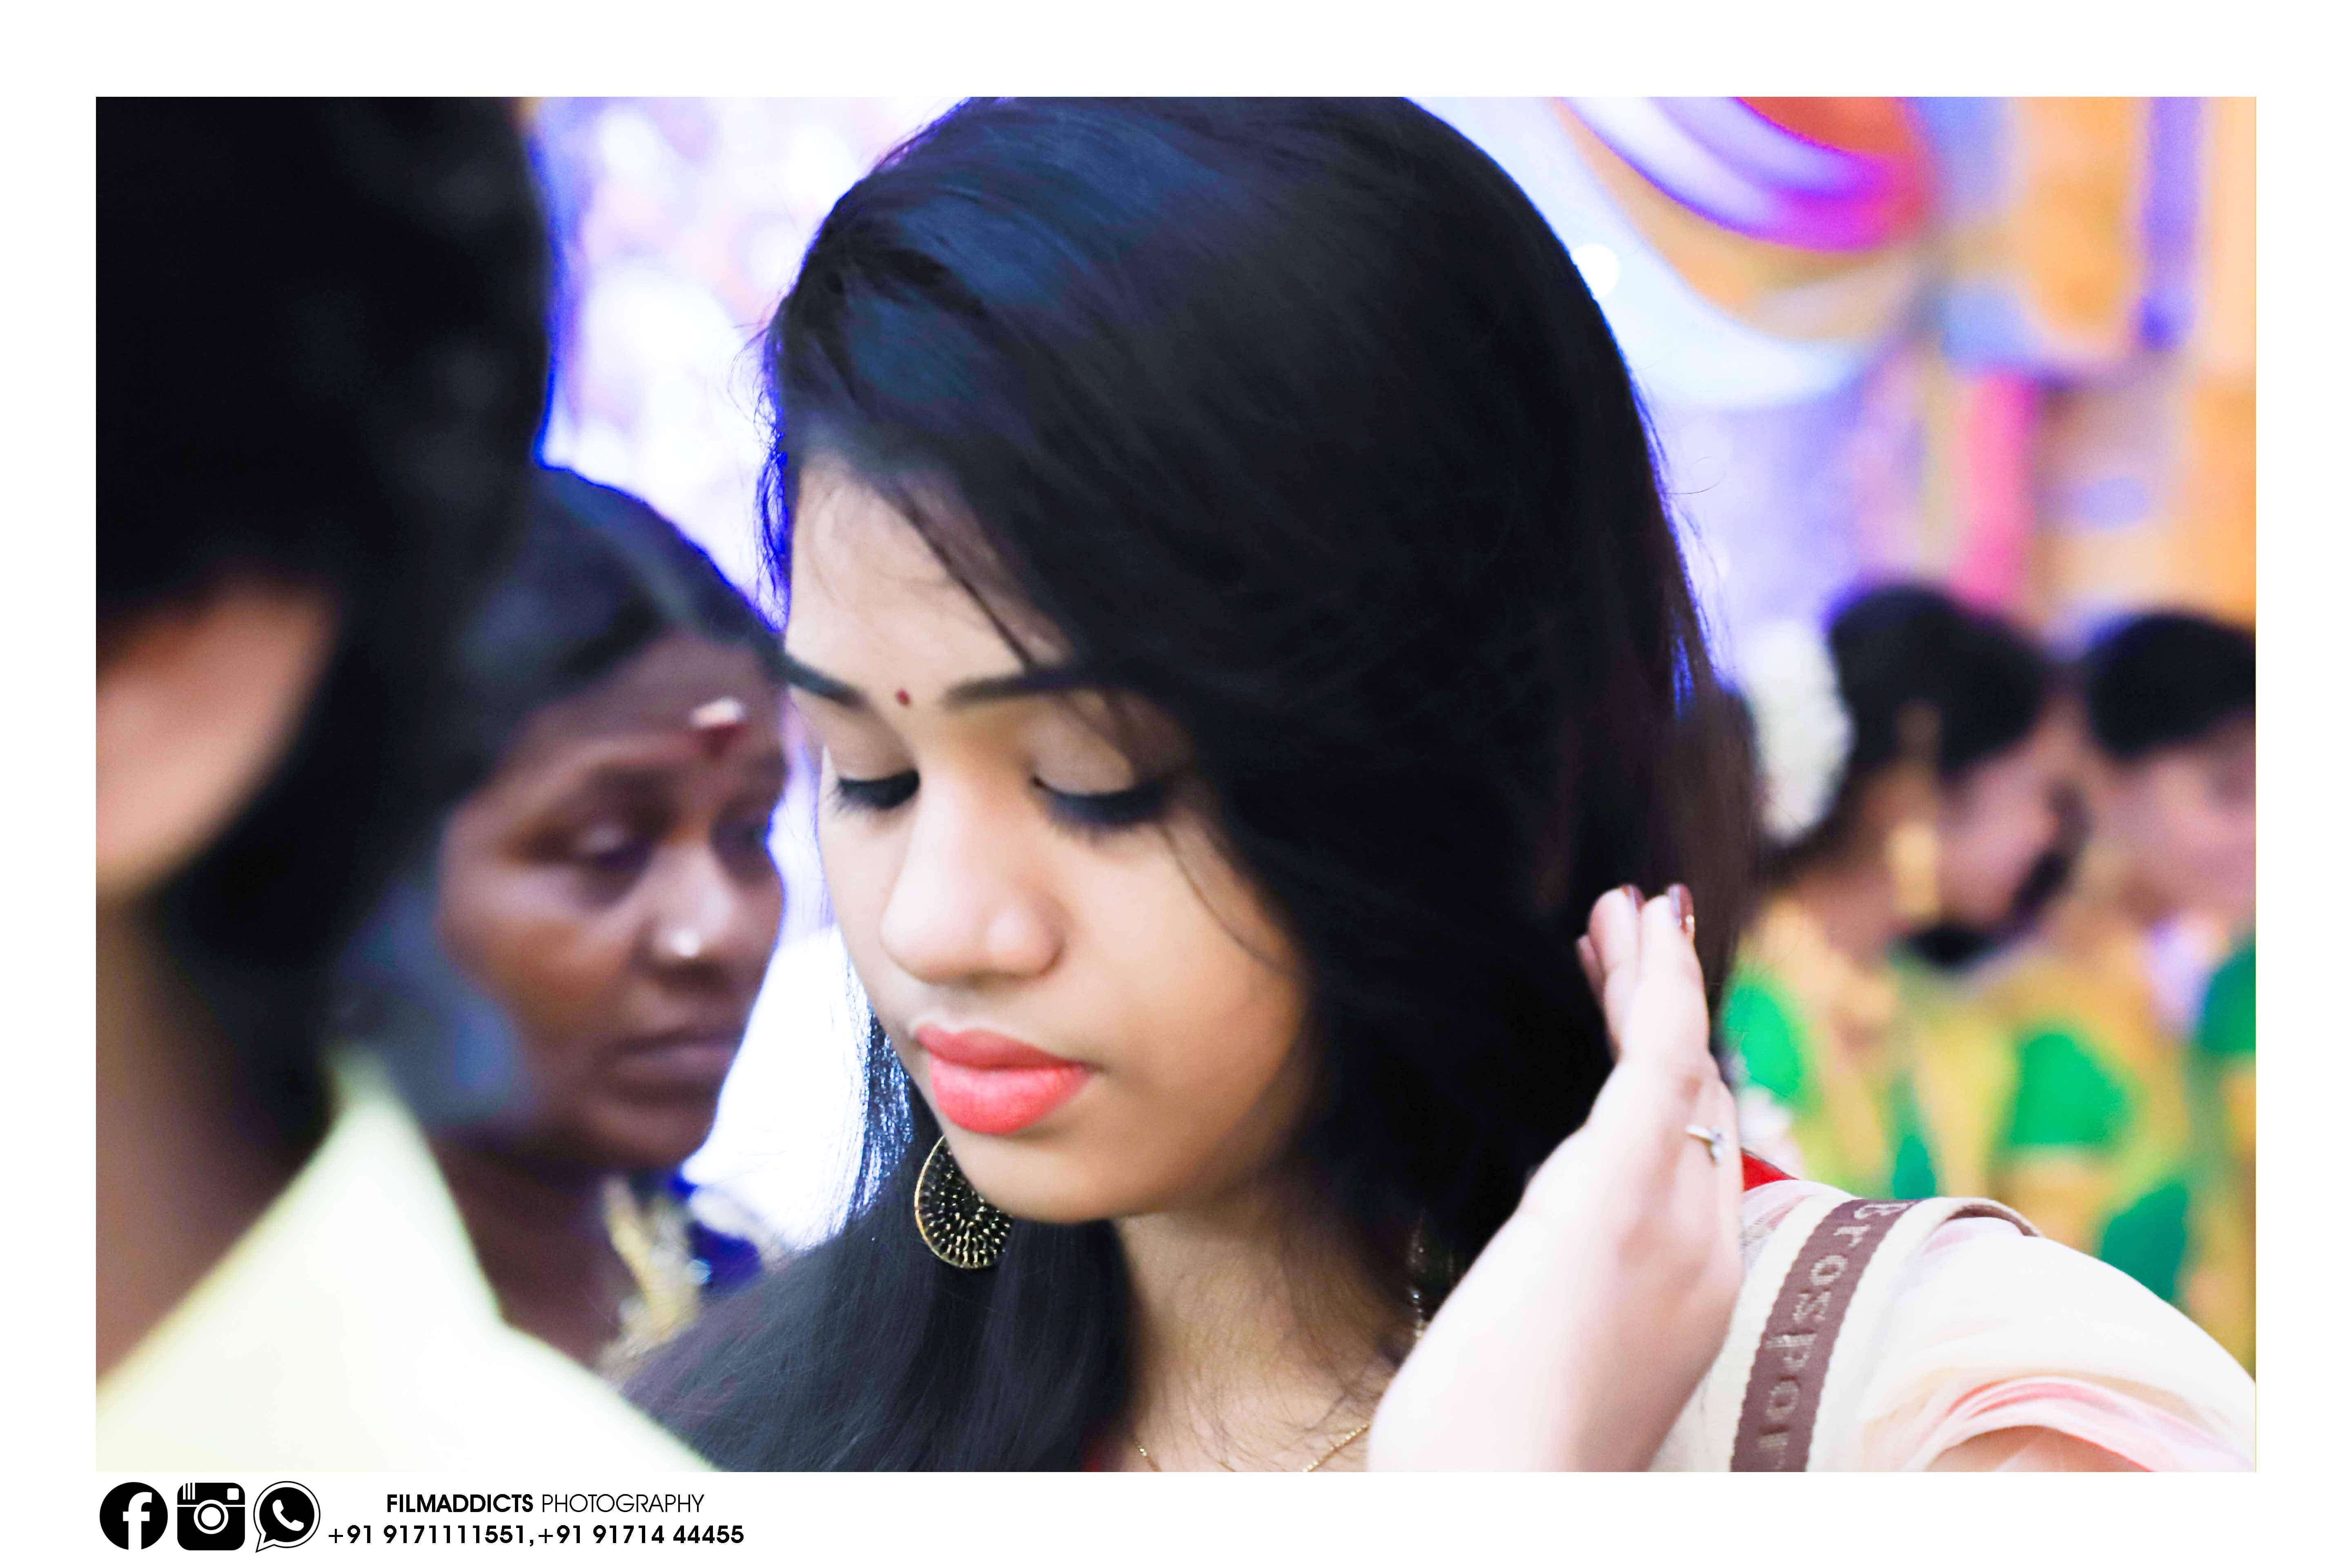 Best-Candid-Photo-in-theni, best-candid-Photo-in-theni,best-candid-Photo-in-theni,Best Candid Wedding Photographer in Theni,Best Candid Wedding Photographer in Theni,creative-wedding-Photo-in-theni,creative-candid-Photo-in-theni